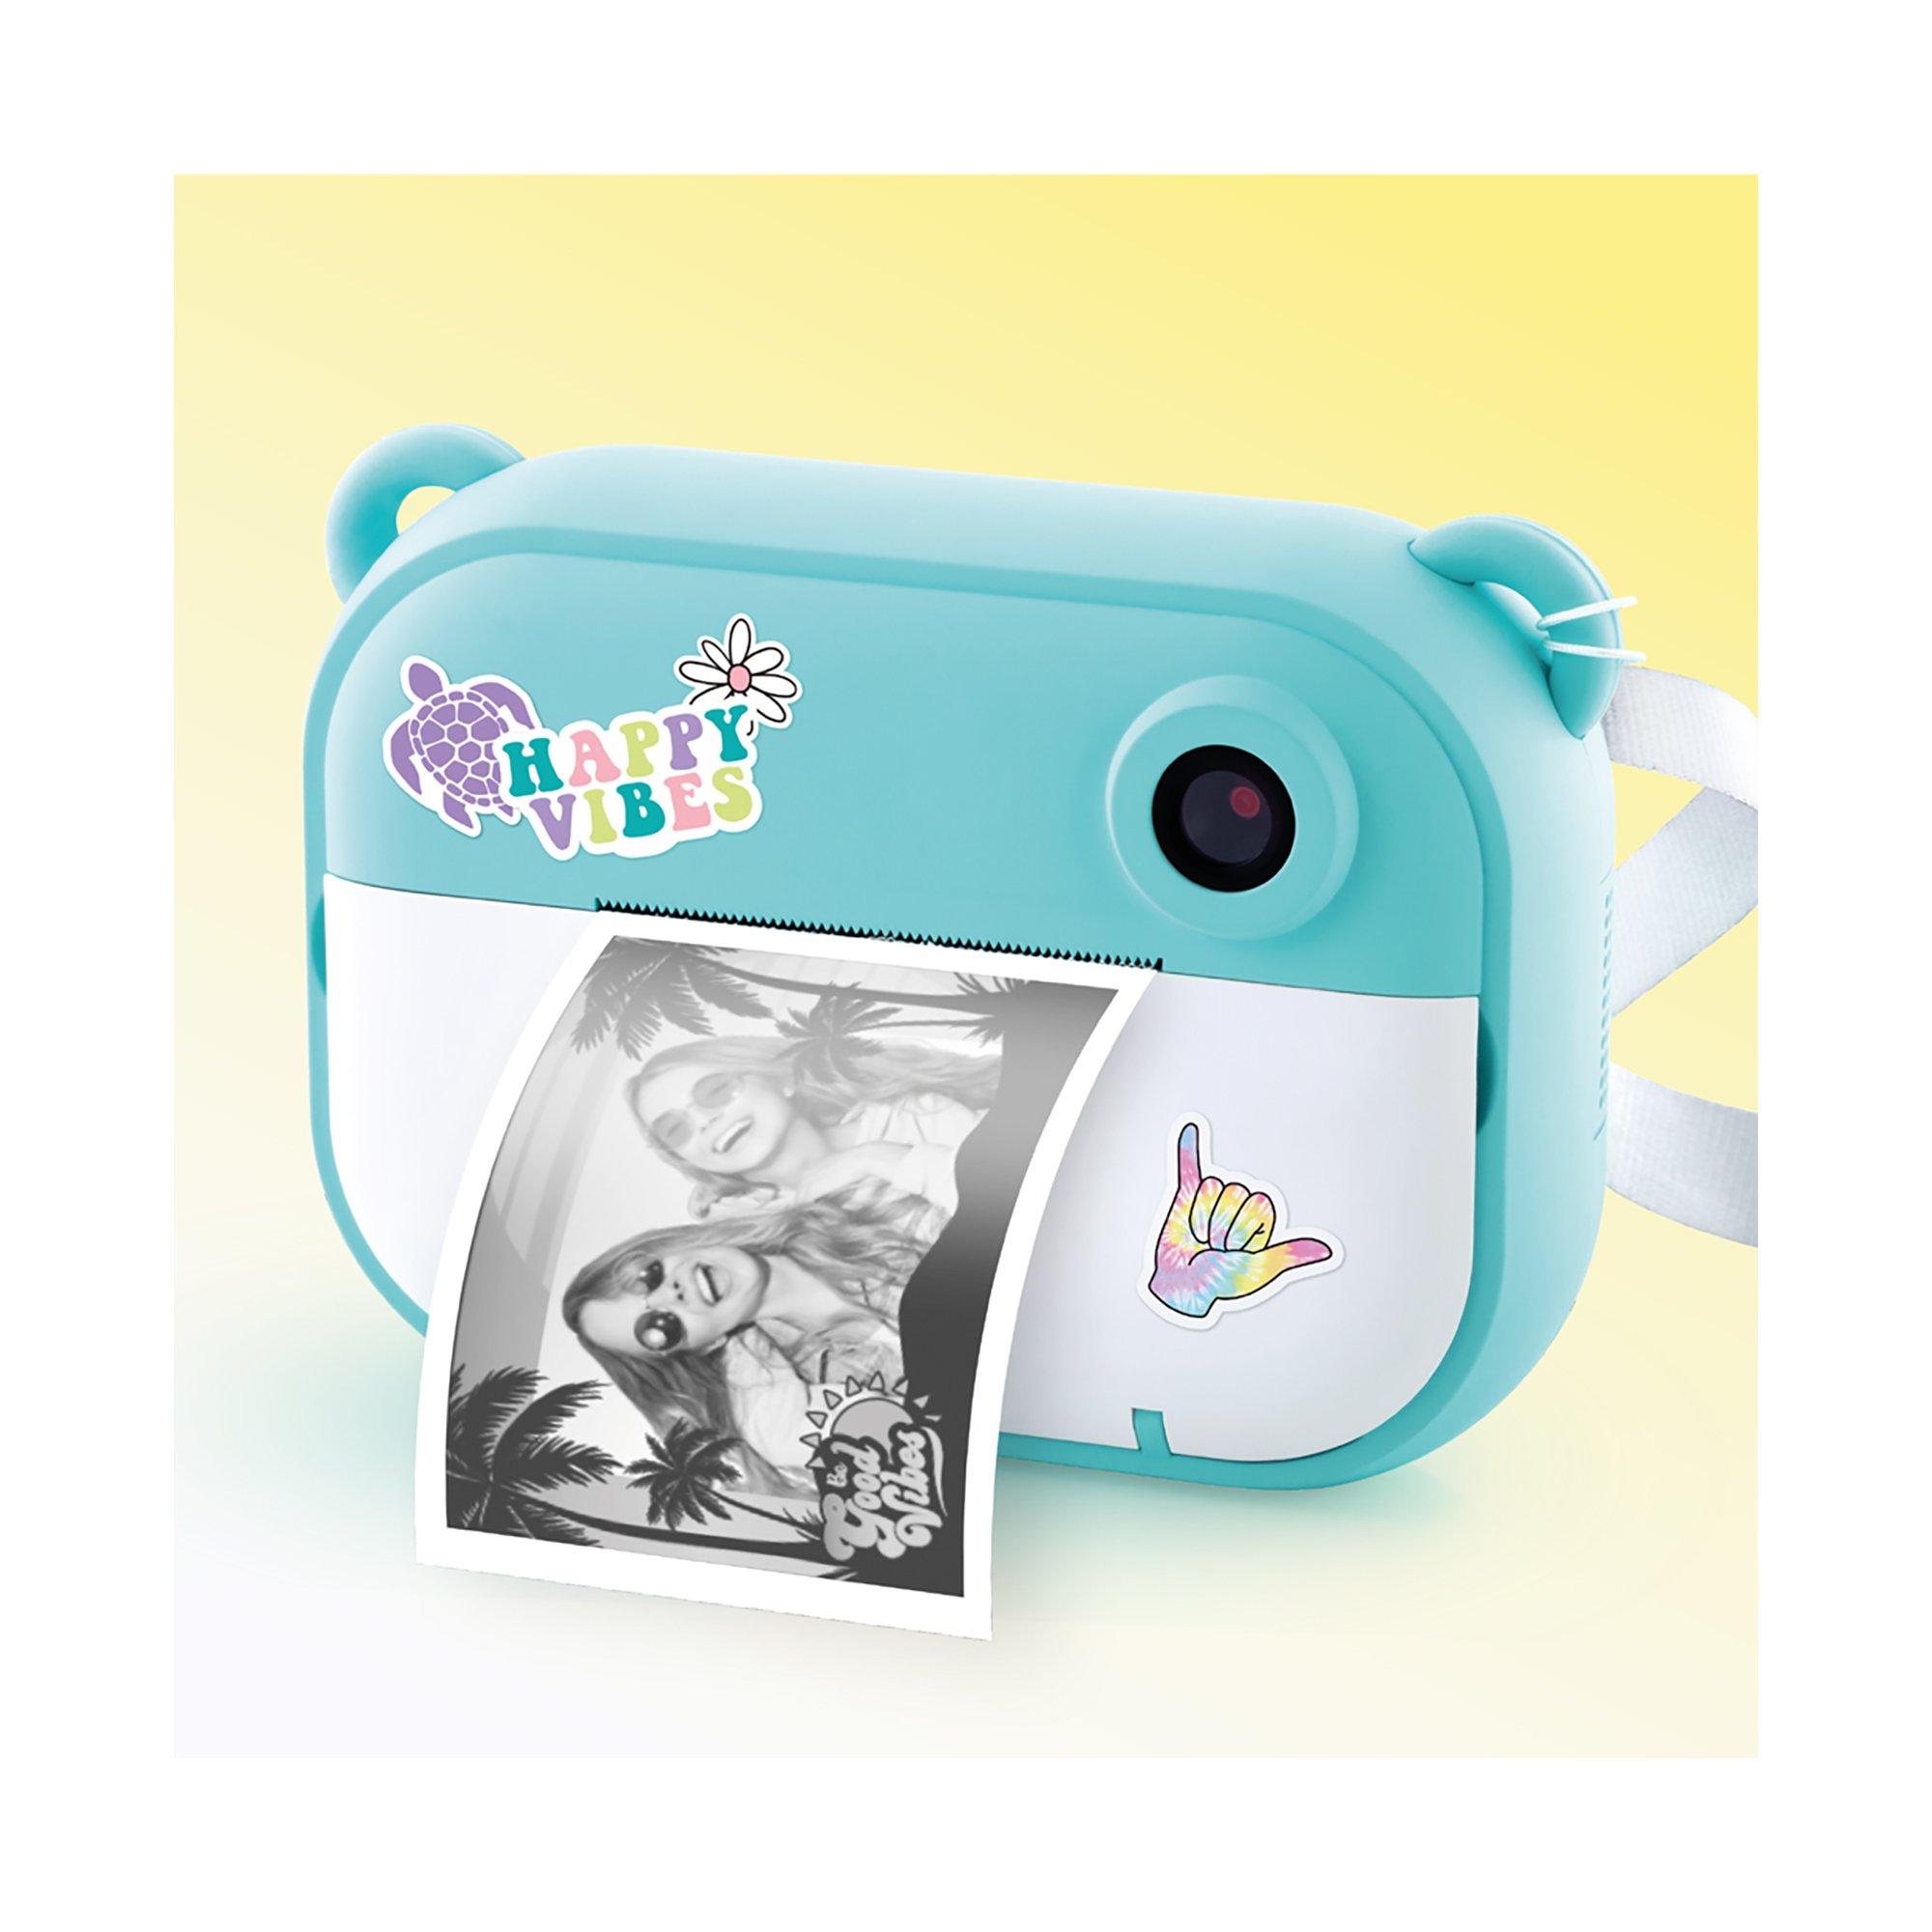 Canal Toys  Instant Camera, Photo Creator 